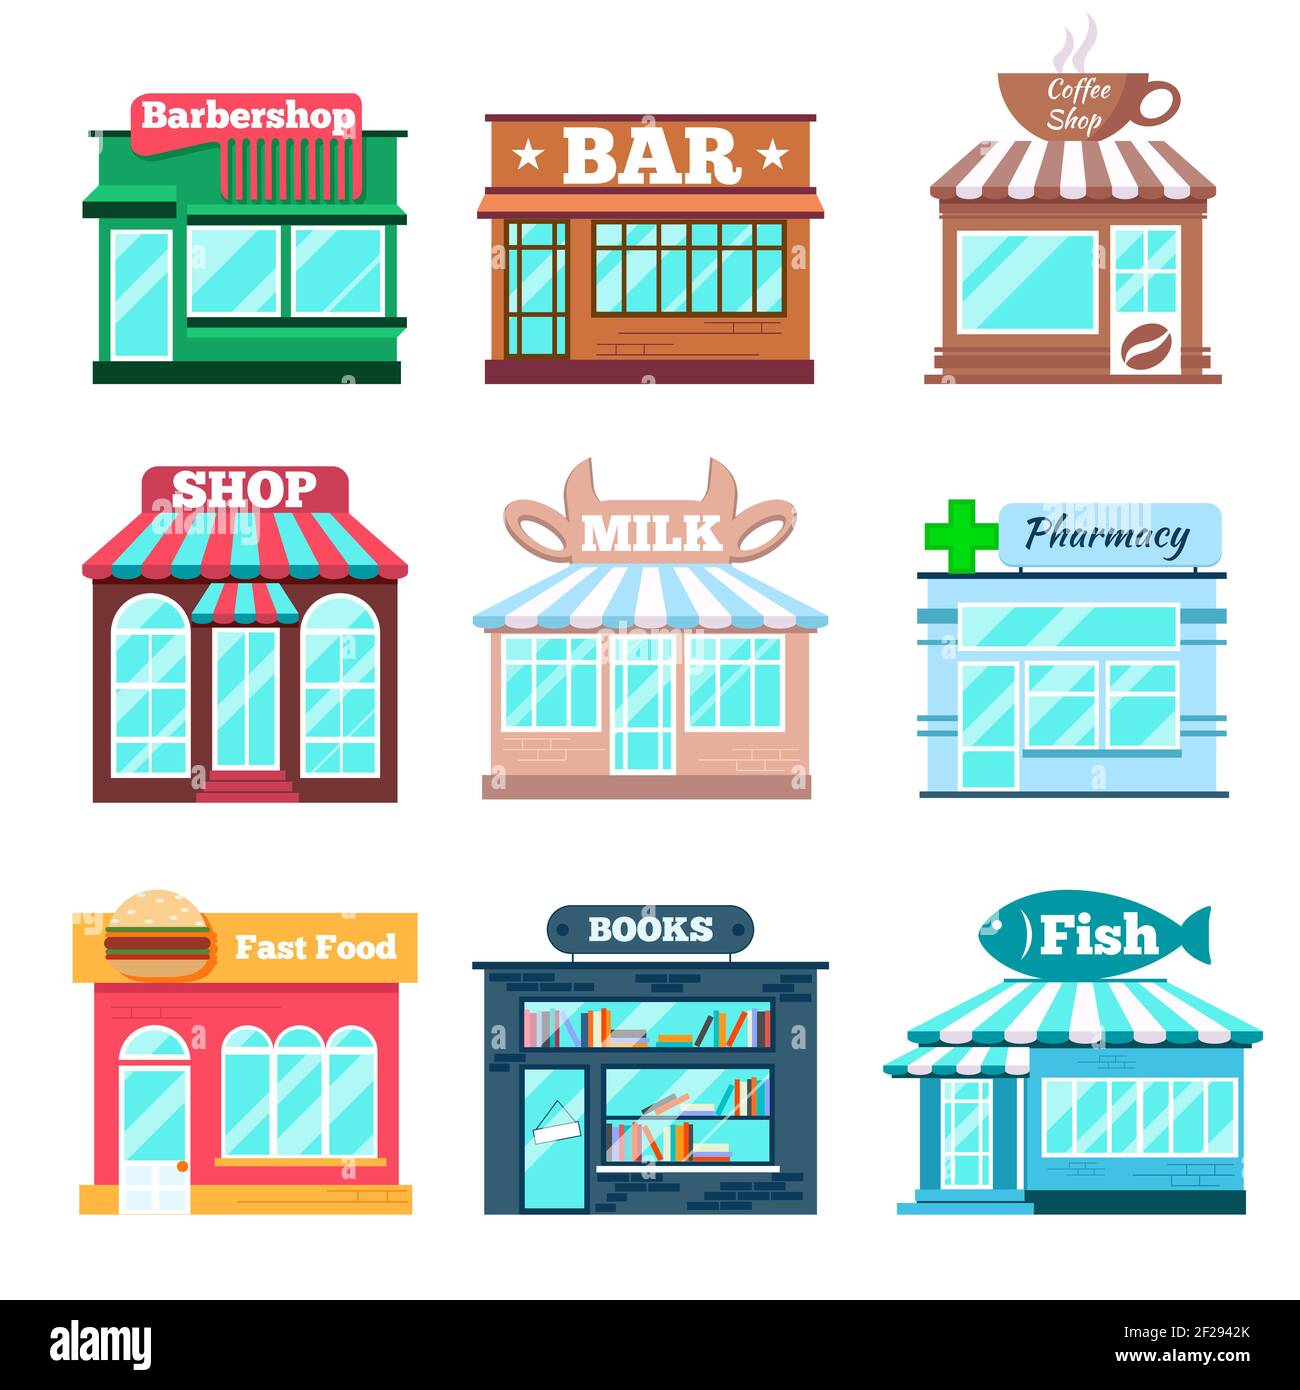 Store and shop buildings flat icons set. Fast food, fish shop, book and pharmacy, milk and bar, coffe and barbershop. Vector illustration Stock Vector